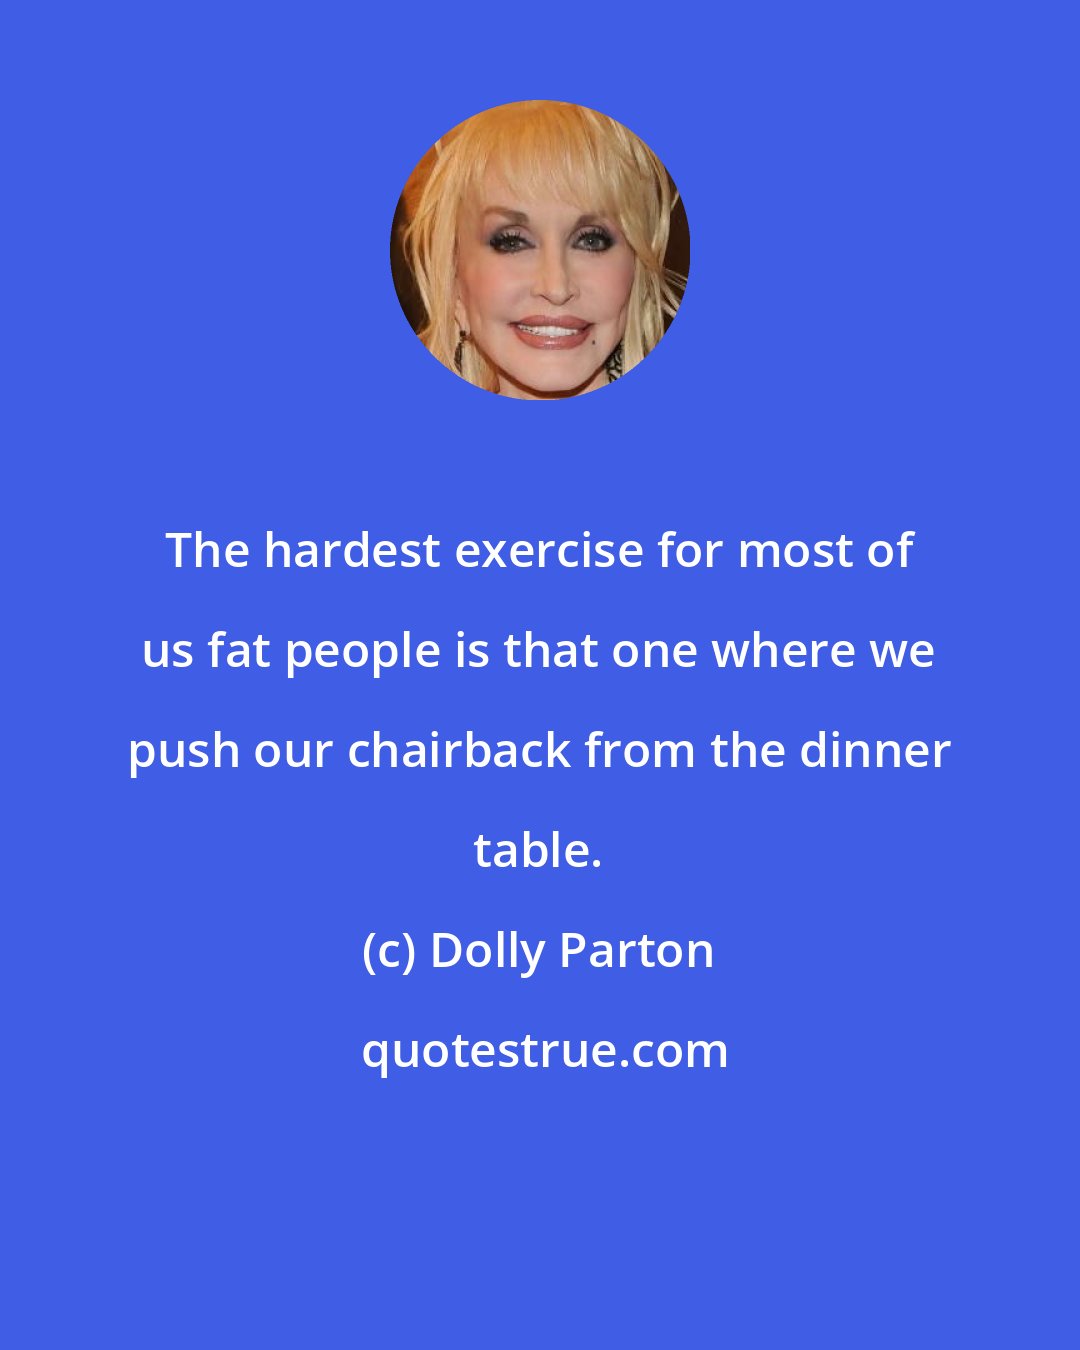 Dolly Parton: The hardest exercise for most of us fat people is that one where we push our chairback from the dinner table.